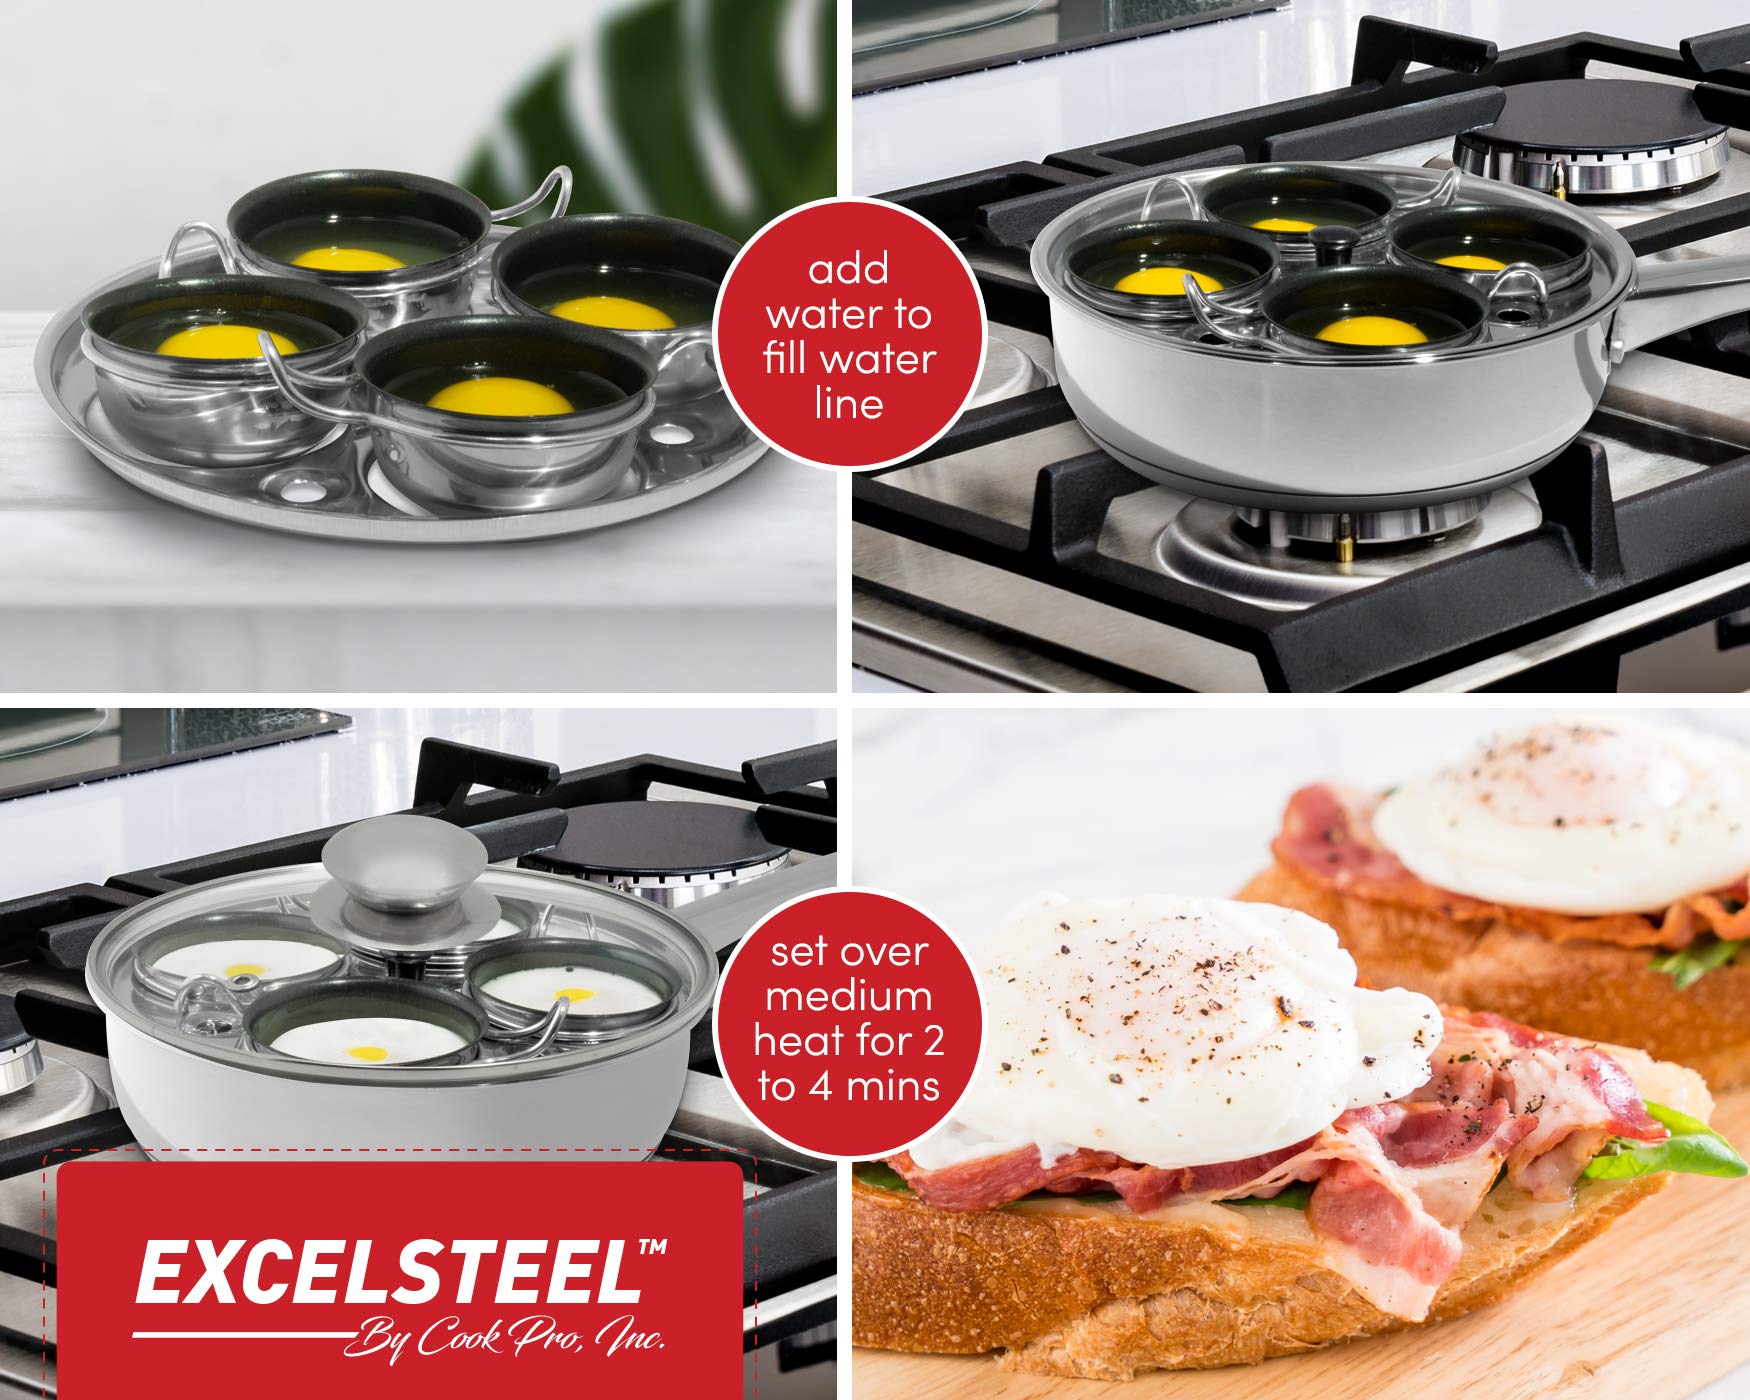 EXCELSTEEL Non Stick Easy Use Rust Resistant Home Kitchen Breakfast Brunch Induction Cooktop Egg Poacher, 4 Cups, 18/10 Stainless Steel